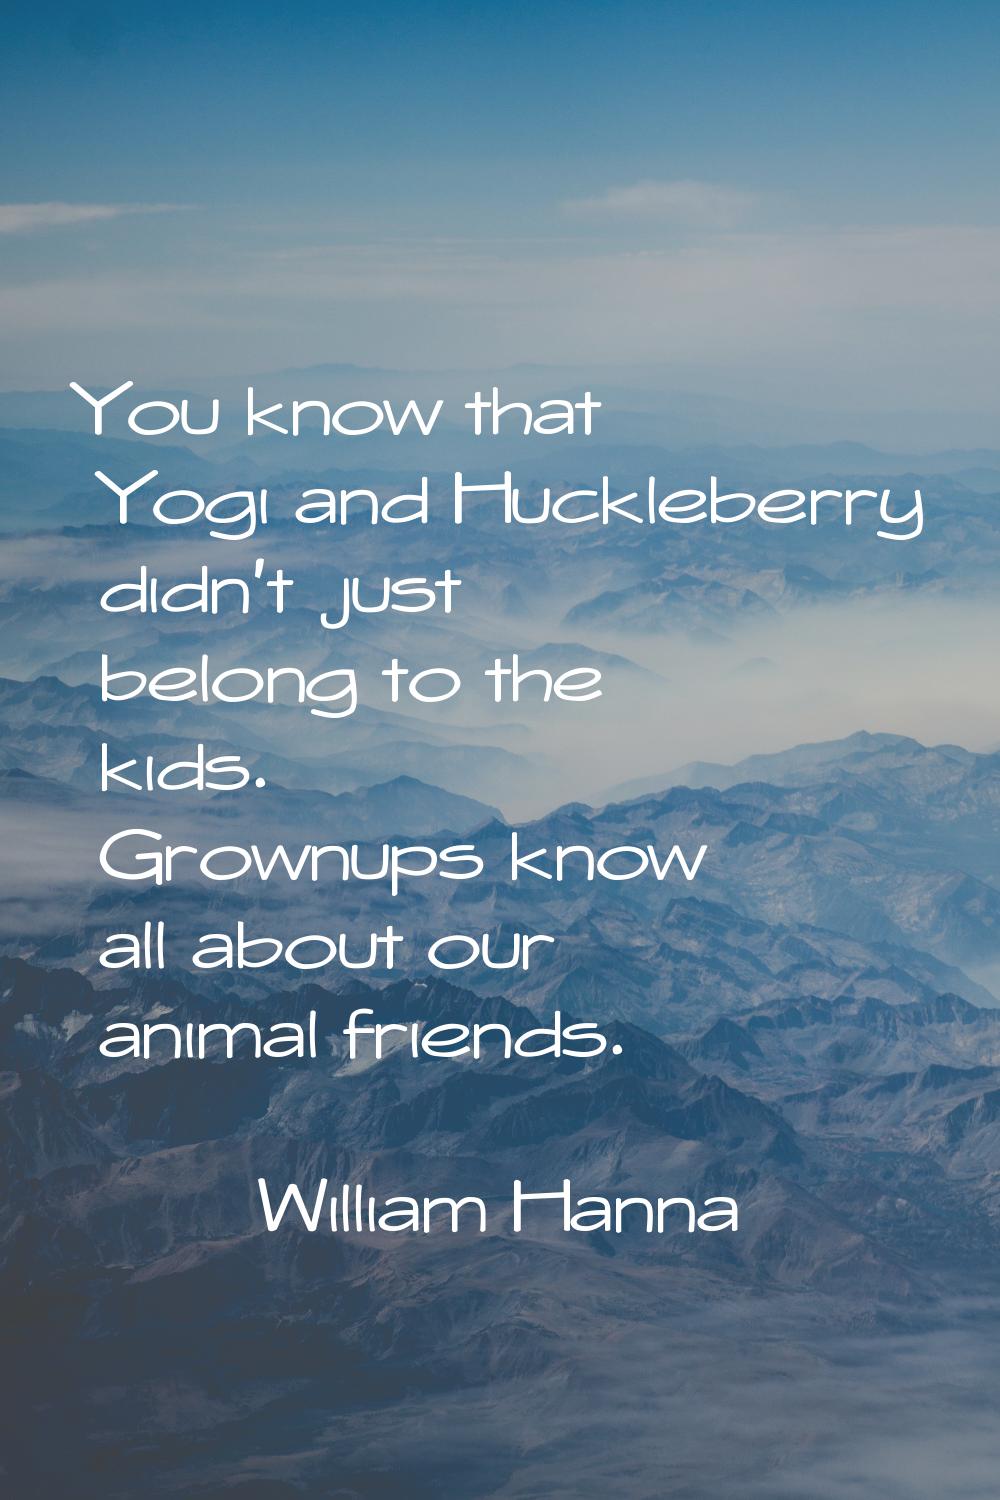 You know that Yogi and Huckleberry didn't just belong to the kids. Grownups know all about our anim